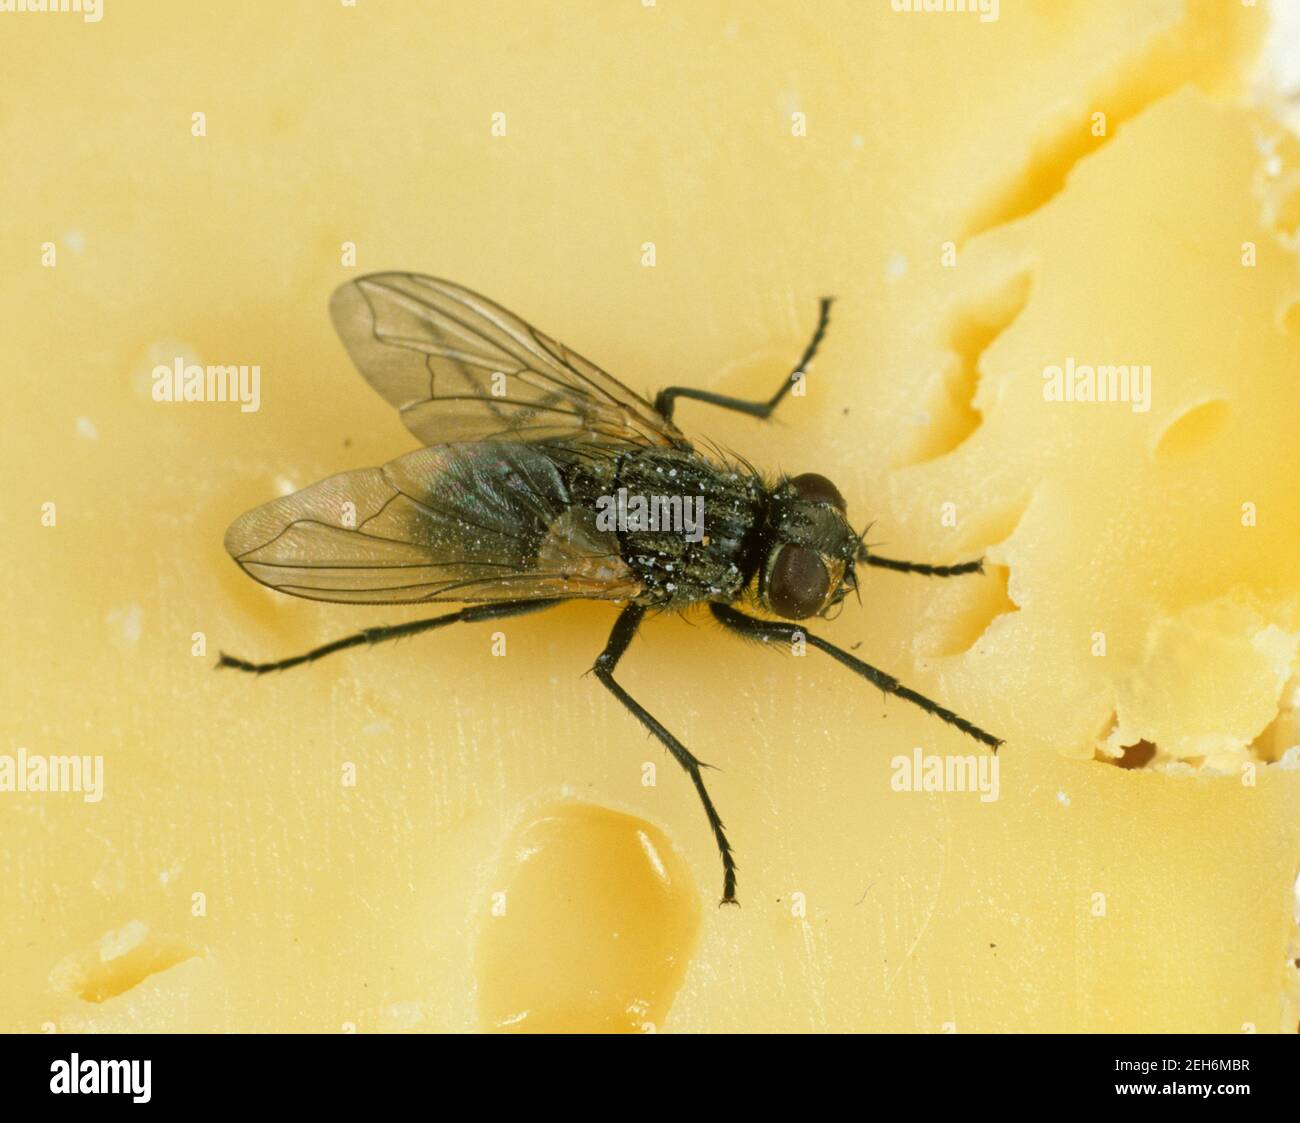 House fly (Musca domestica) adult public health pest on cheese, kitchen hygiene Stock Photo